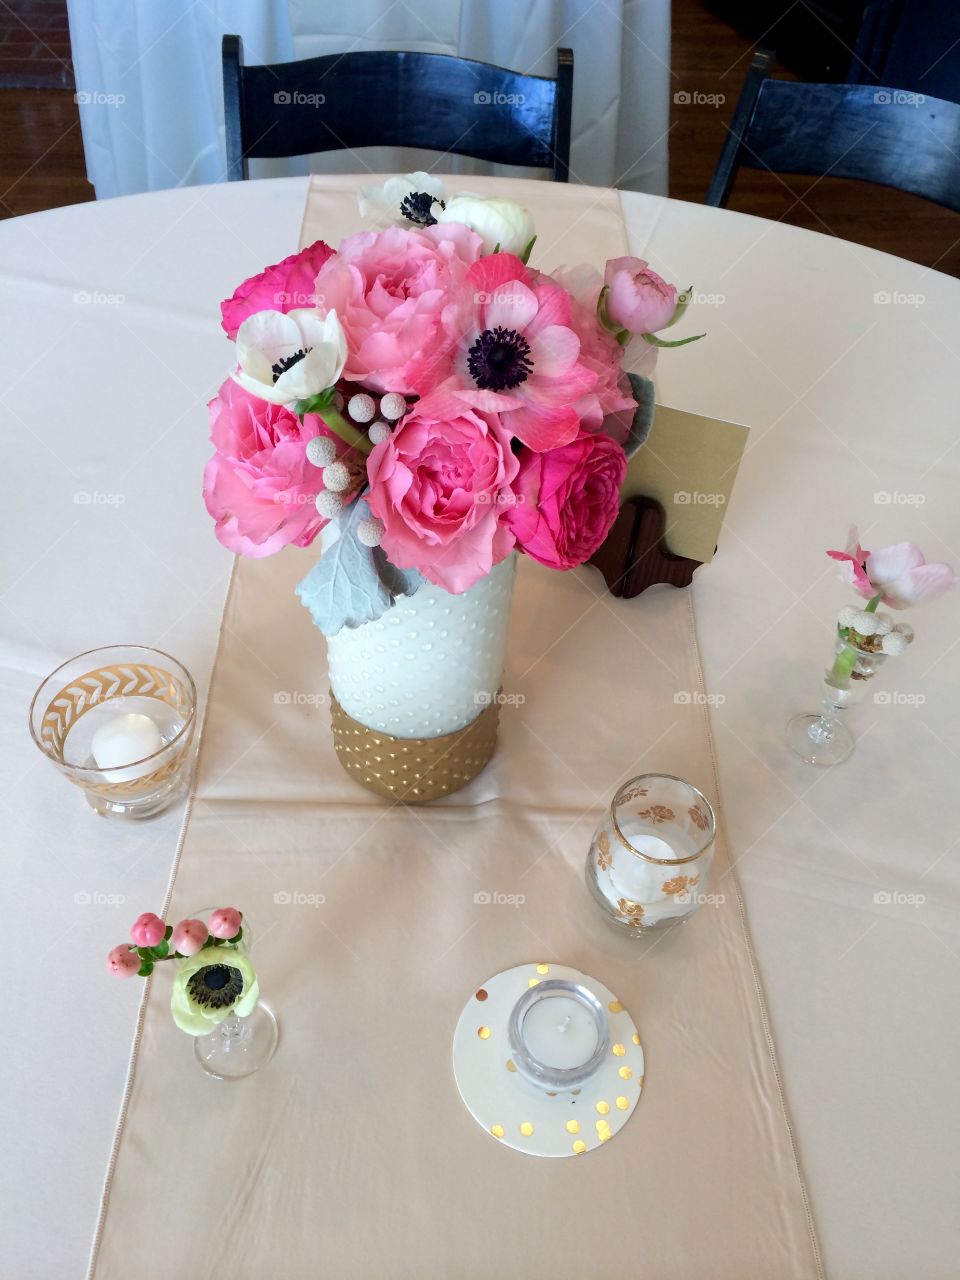 Flower, No Person, Table, Luxury, Decoration